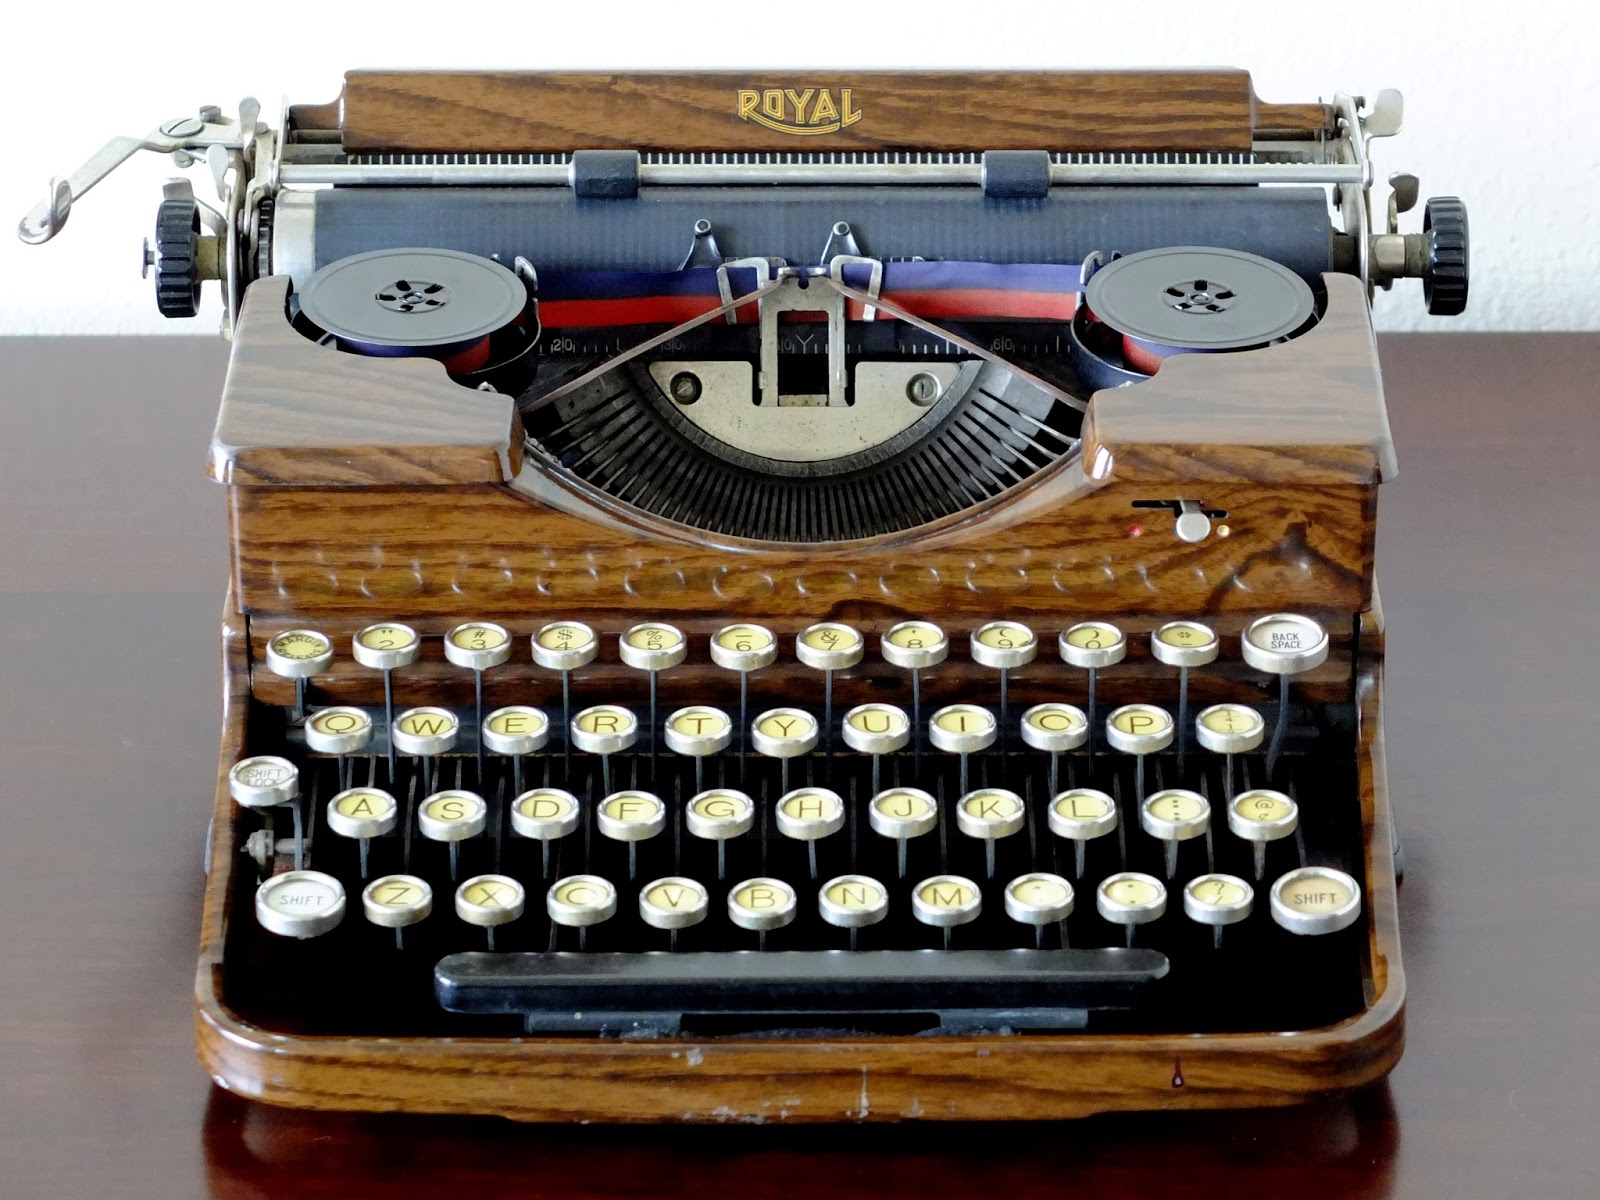 x over it: Portable typewriters of the 1920s